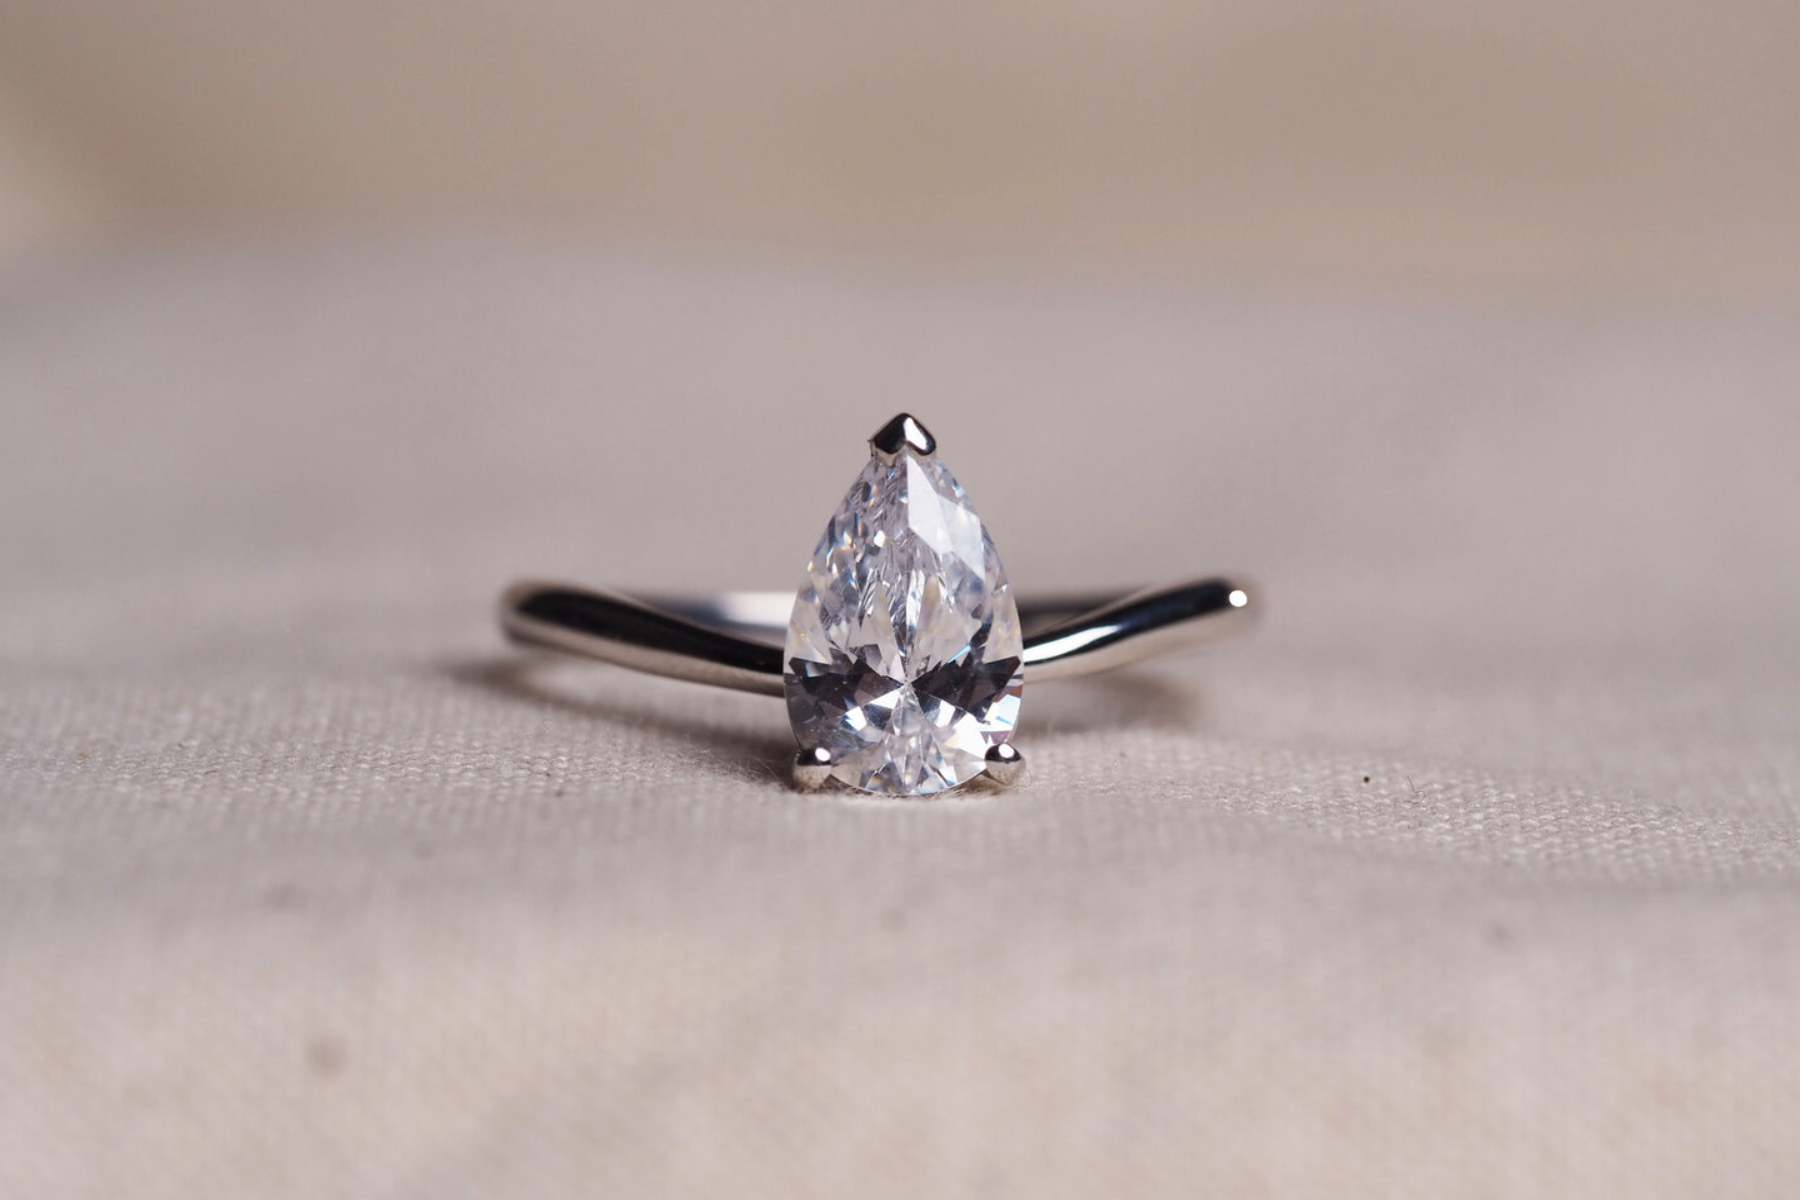 A diamond engagement ring with a pear-shaped cut resting on a floor